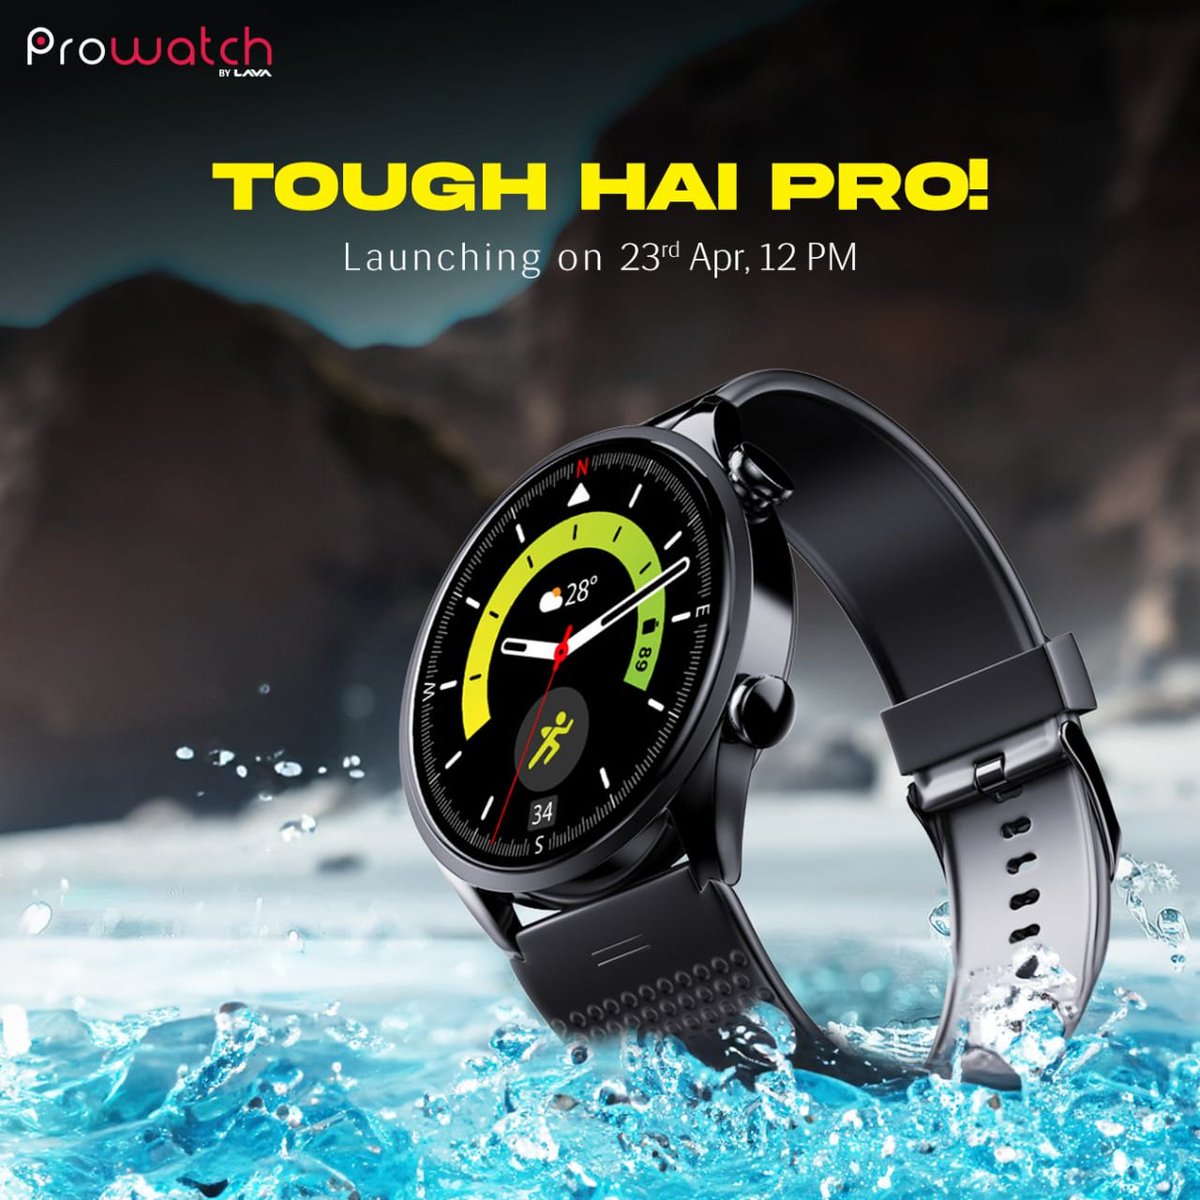 A new era in wearable technology. Stay tuned! #ProwatchLaunchTomorrow